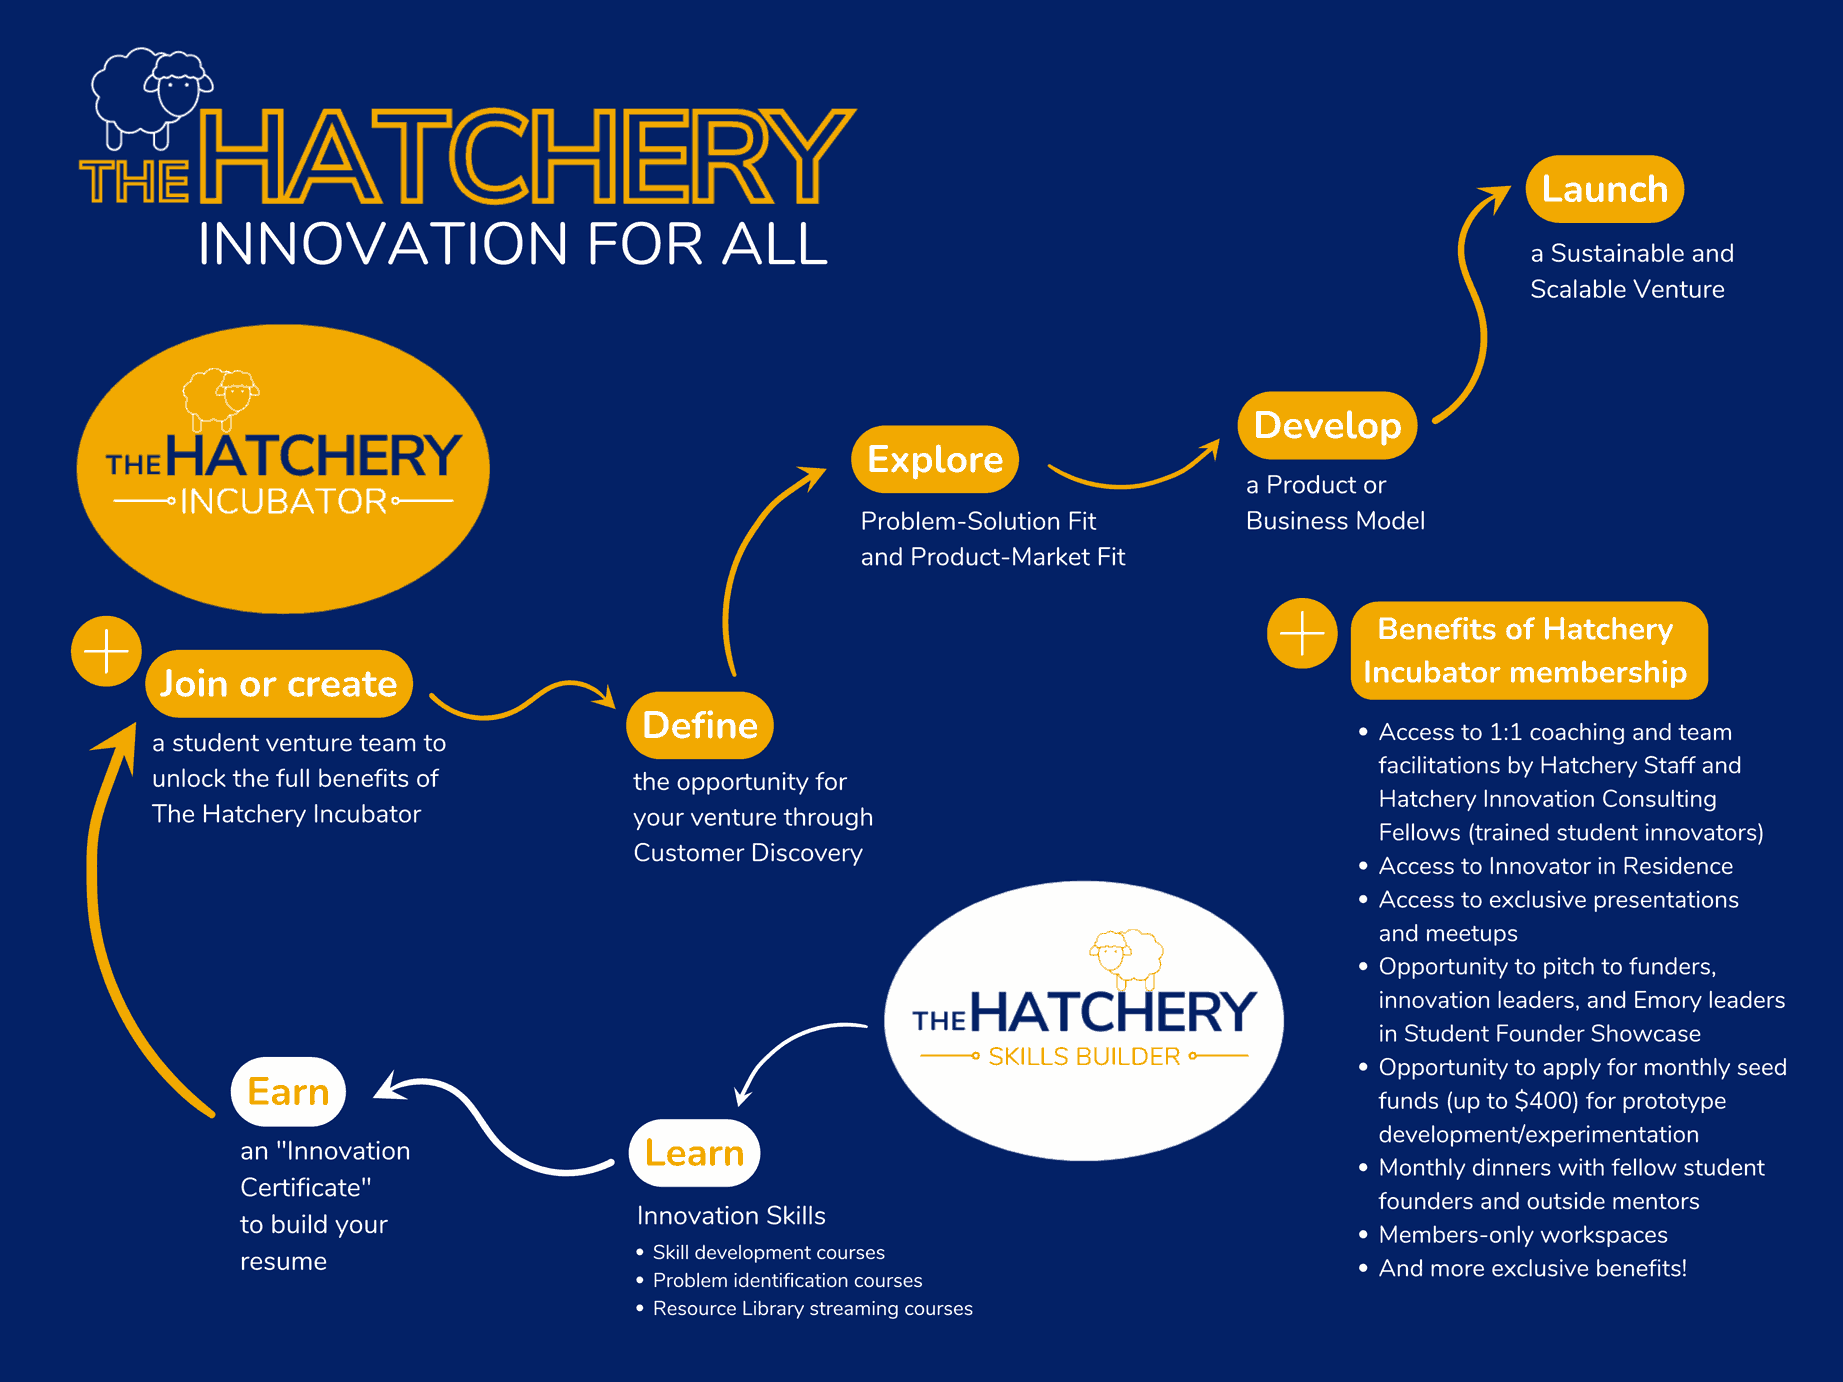 This diagram represents the flow and cadence of an engagement with The Hatchery.